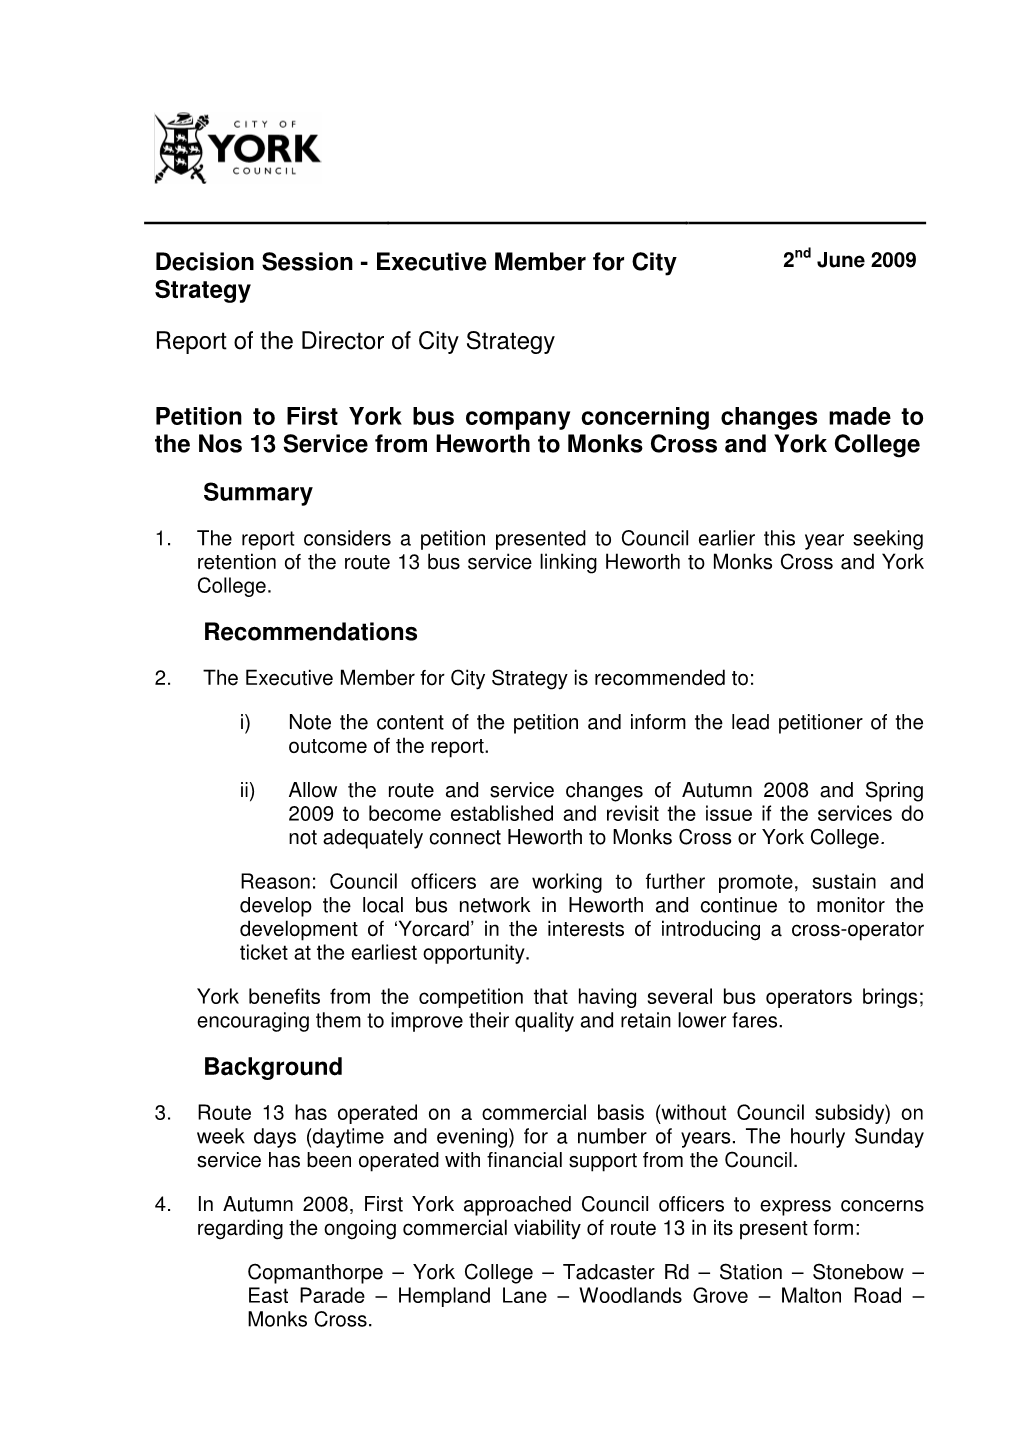 Report of the Director of City Strategy Petition to First York Bus Company